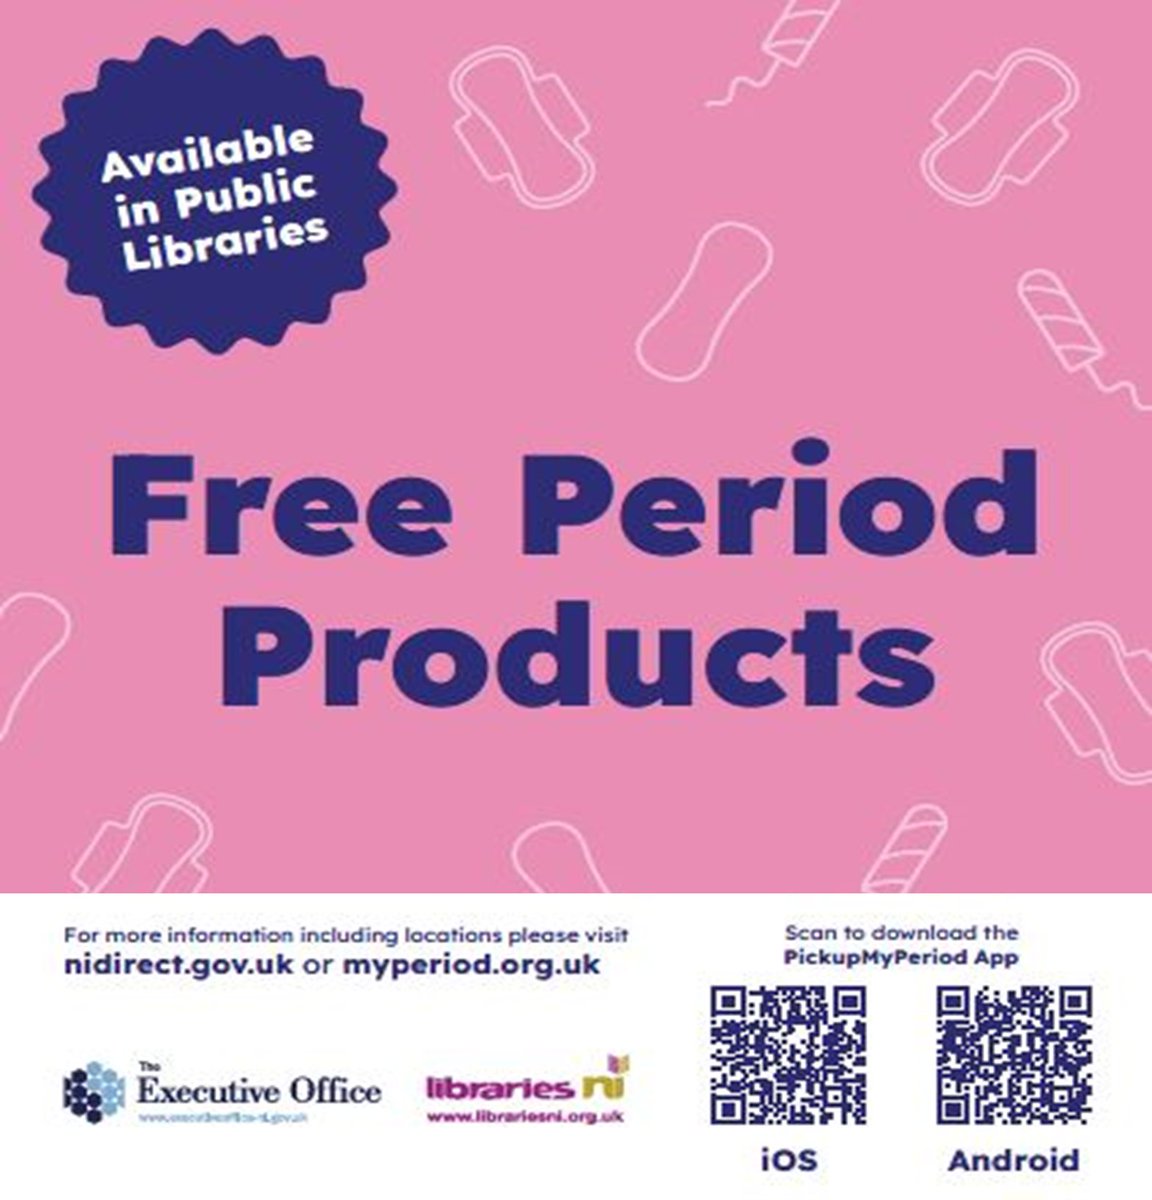 The Northern Ireland Executive has announced new legislation to provide free period products to anyone who needs them. Products are now available for collection at local libraries. Read more here: bit.ly/4aAotn3